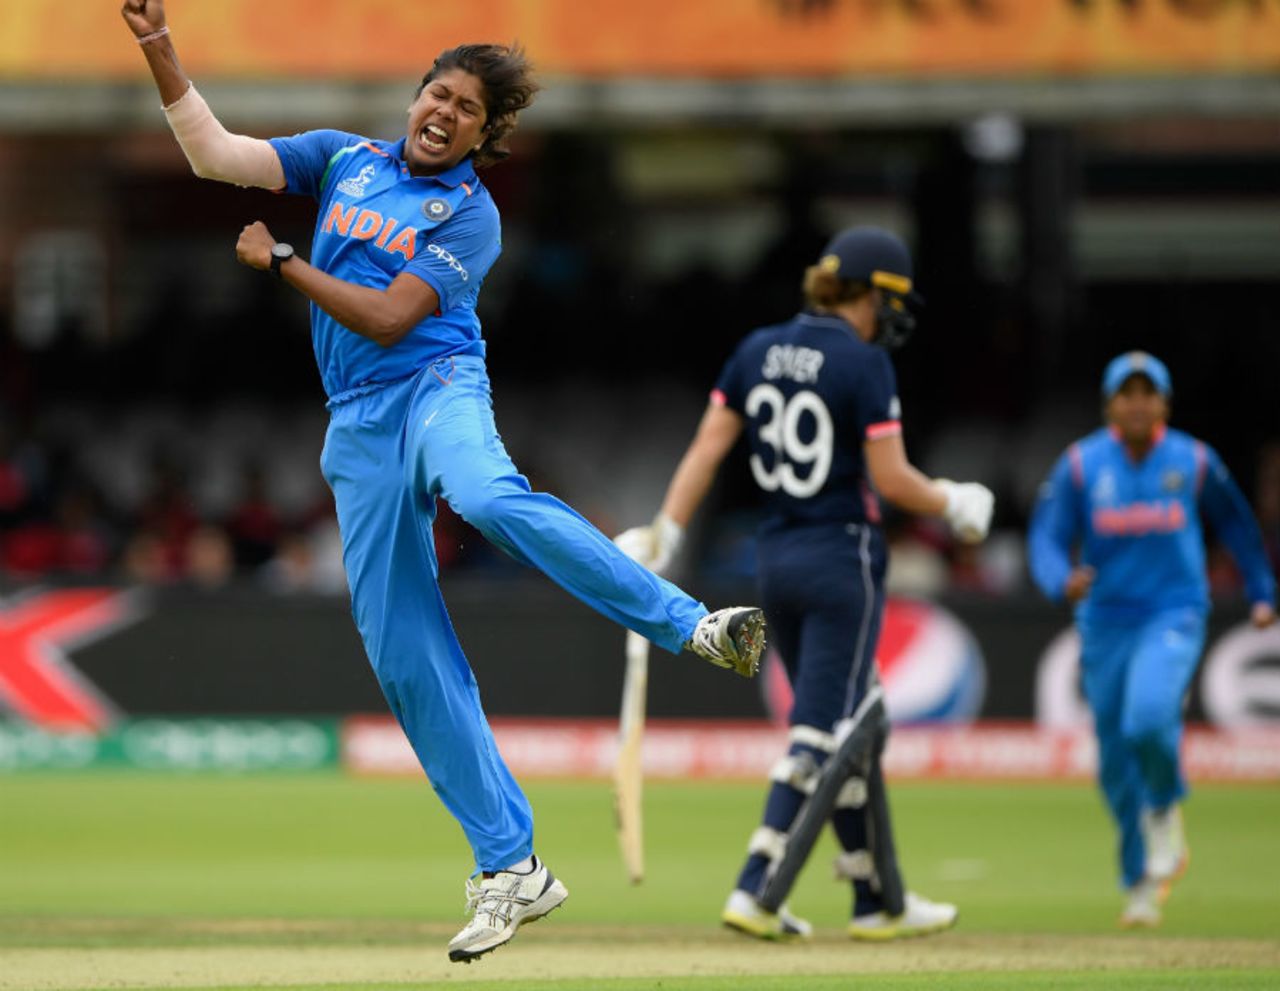 Jhulan Goswami exults after pinning Natalie Sciver plumb in front, England v India, Women's World Cup final 2017, Lord's, July 23, 2017